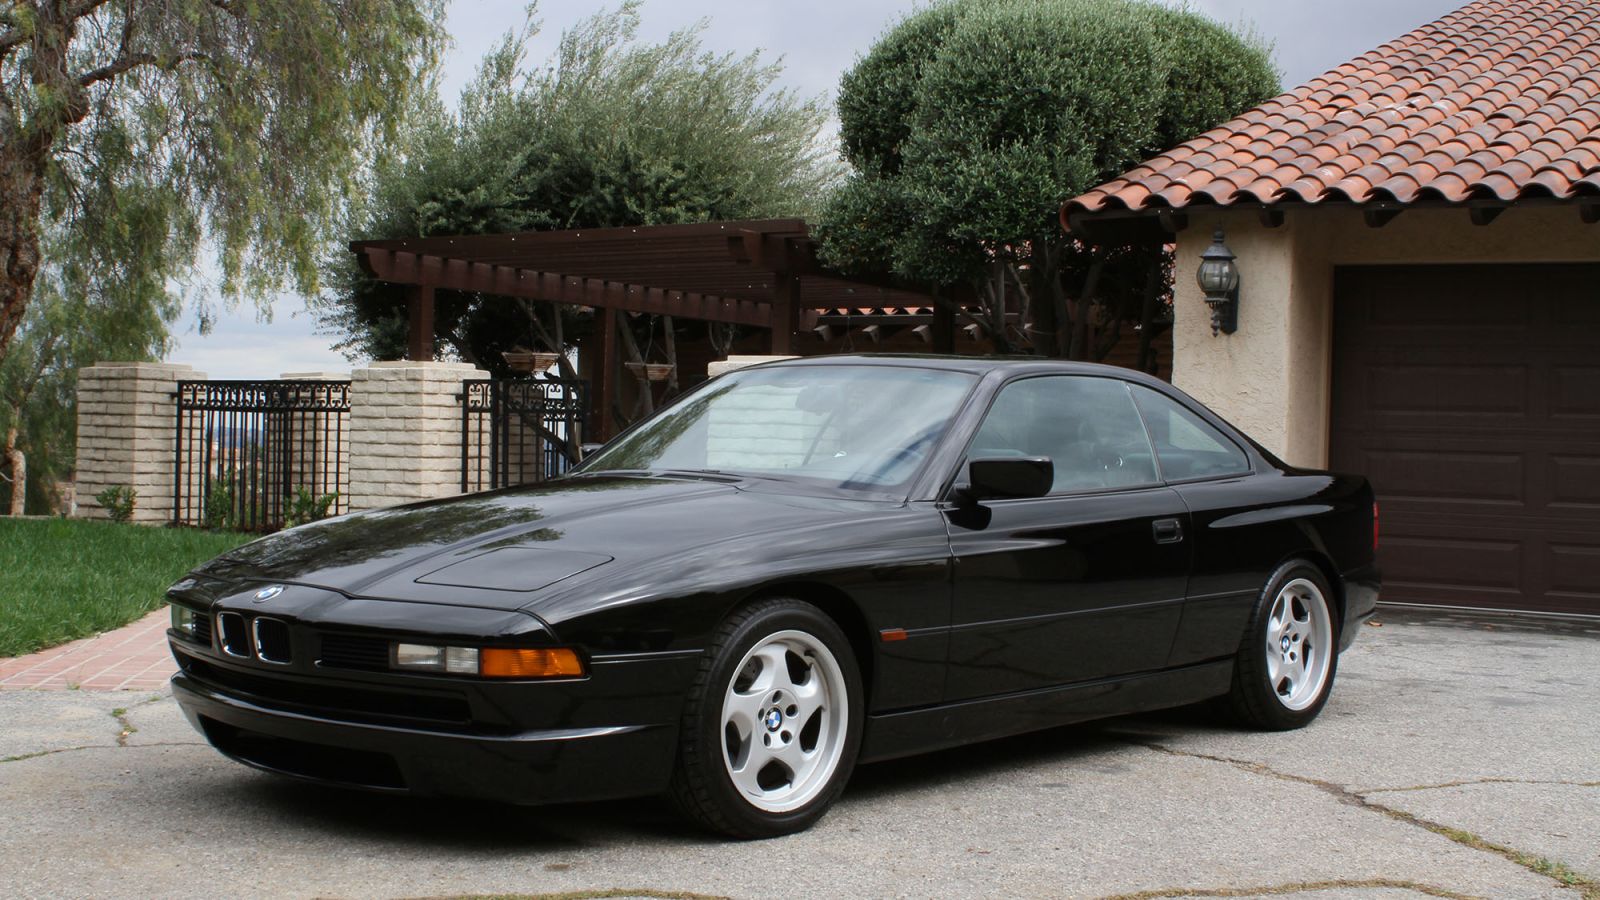 Illustration for article titled An Investment Missed: 1994 BMW 850CSi 6-speed